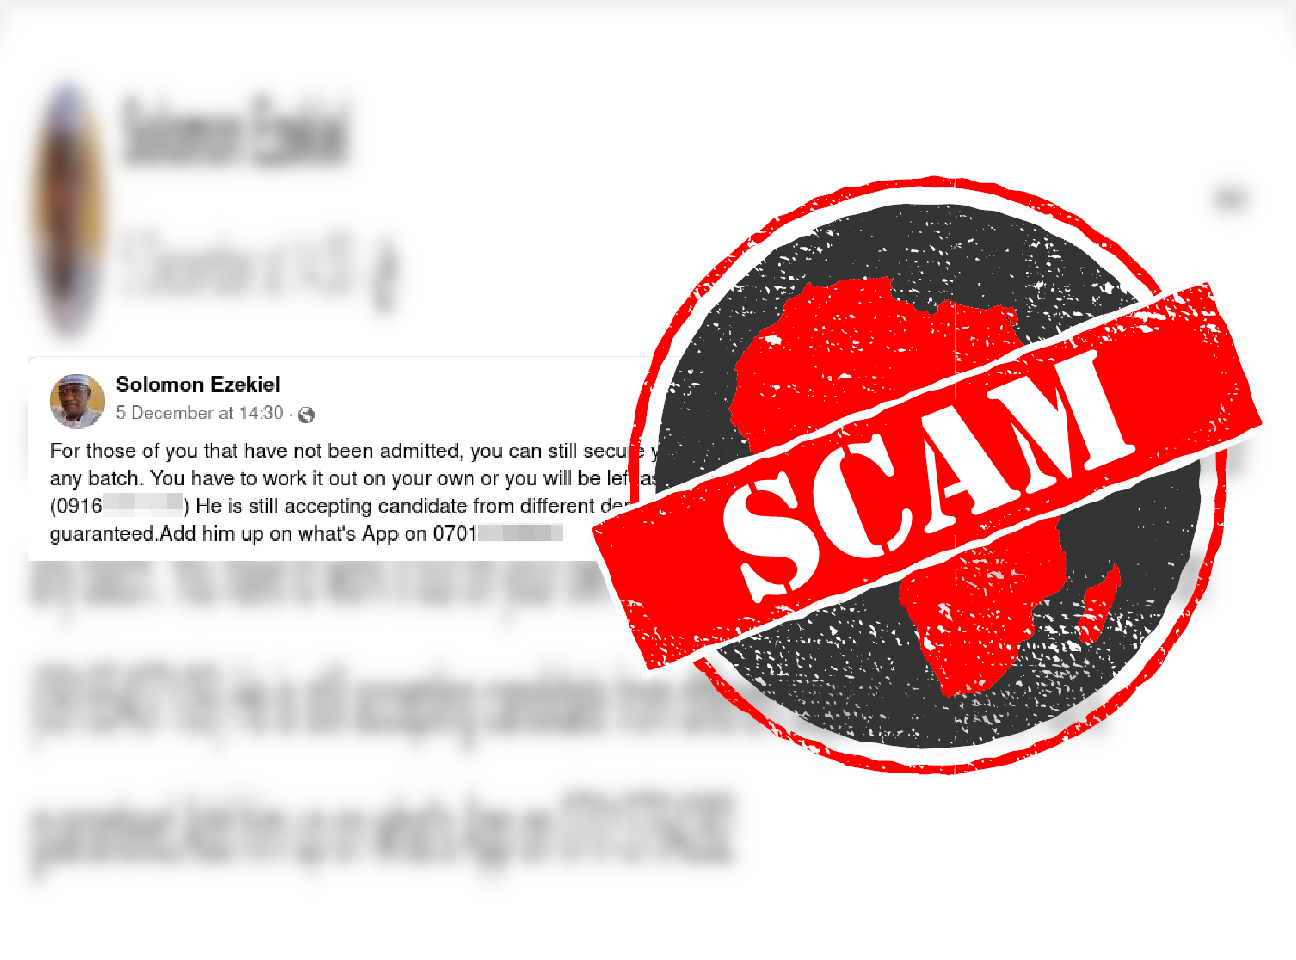 Scam post advertising fake university admission offers